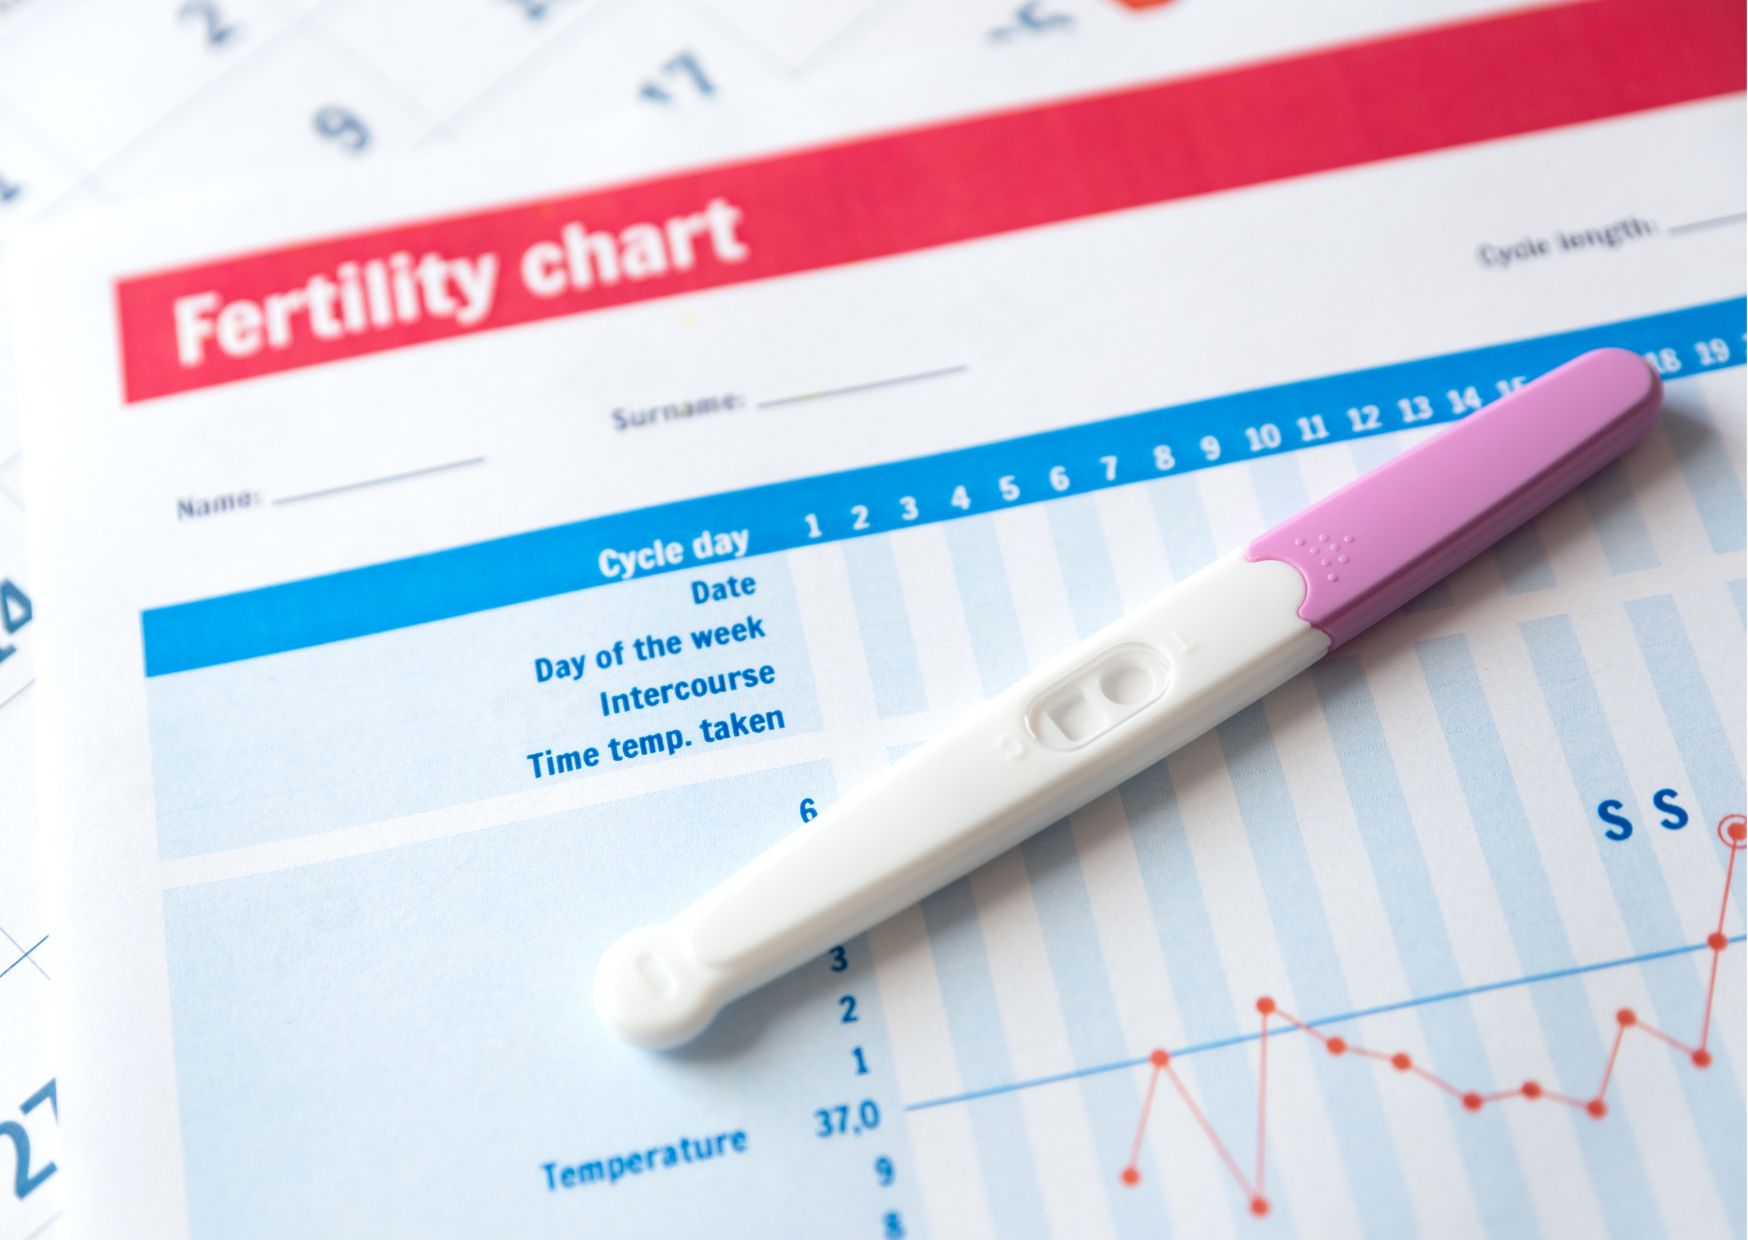 What is Fertility Awareness Method and what is it used for?